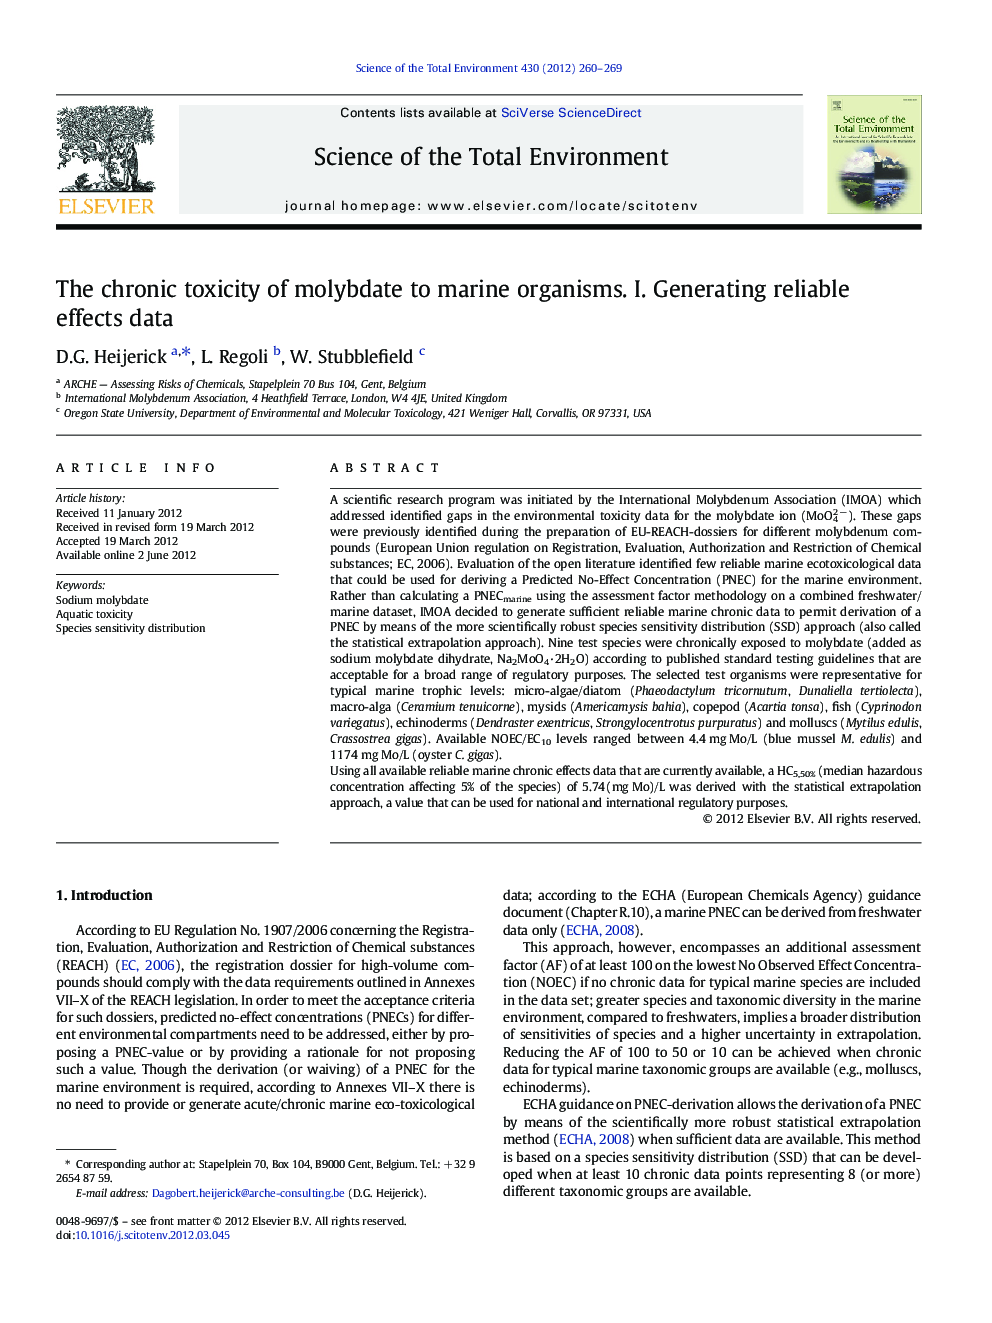 The chronic toxicity of molybdate to marine organisms. I. Generating reliable effects data